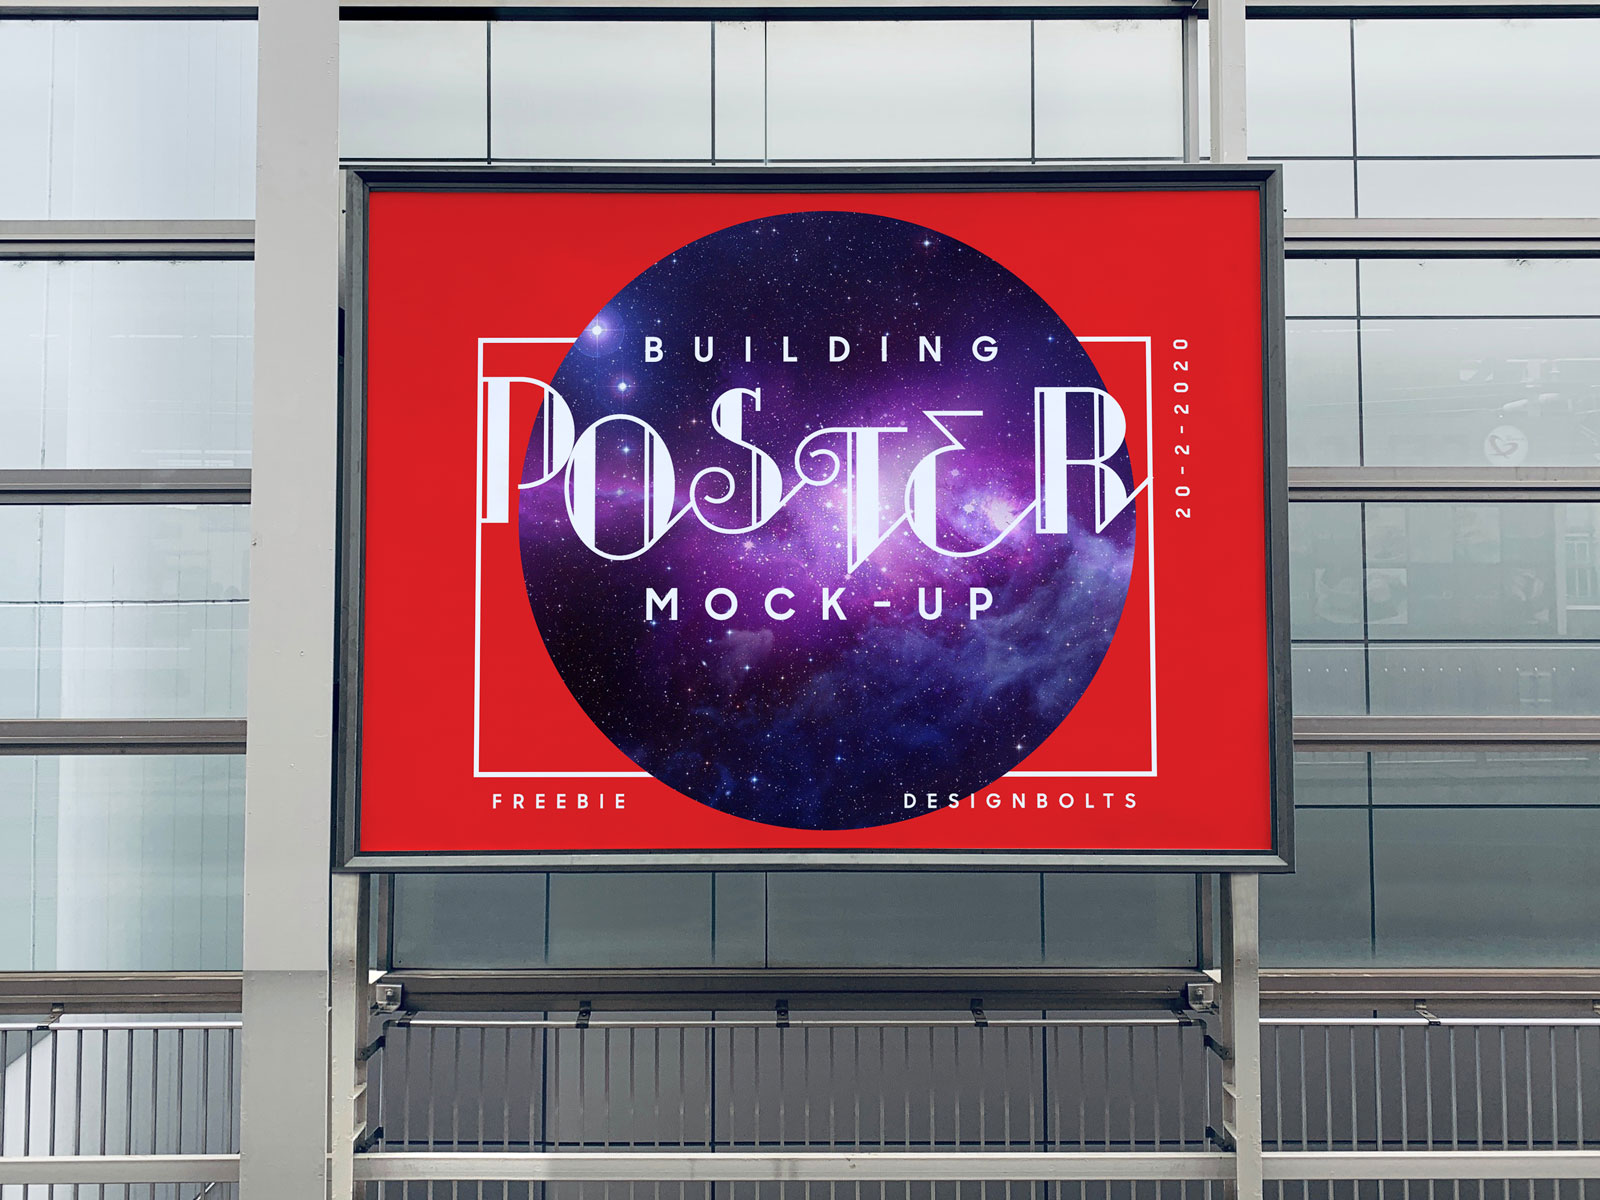 Free-Poster-Mounted-on-Building-Mockup-PSD